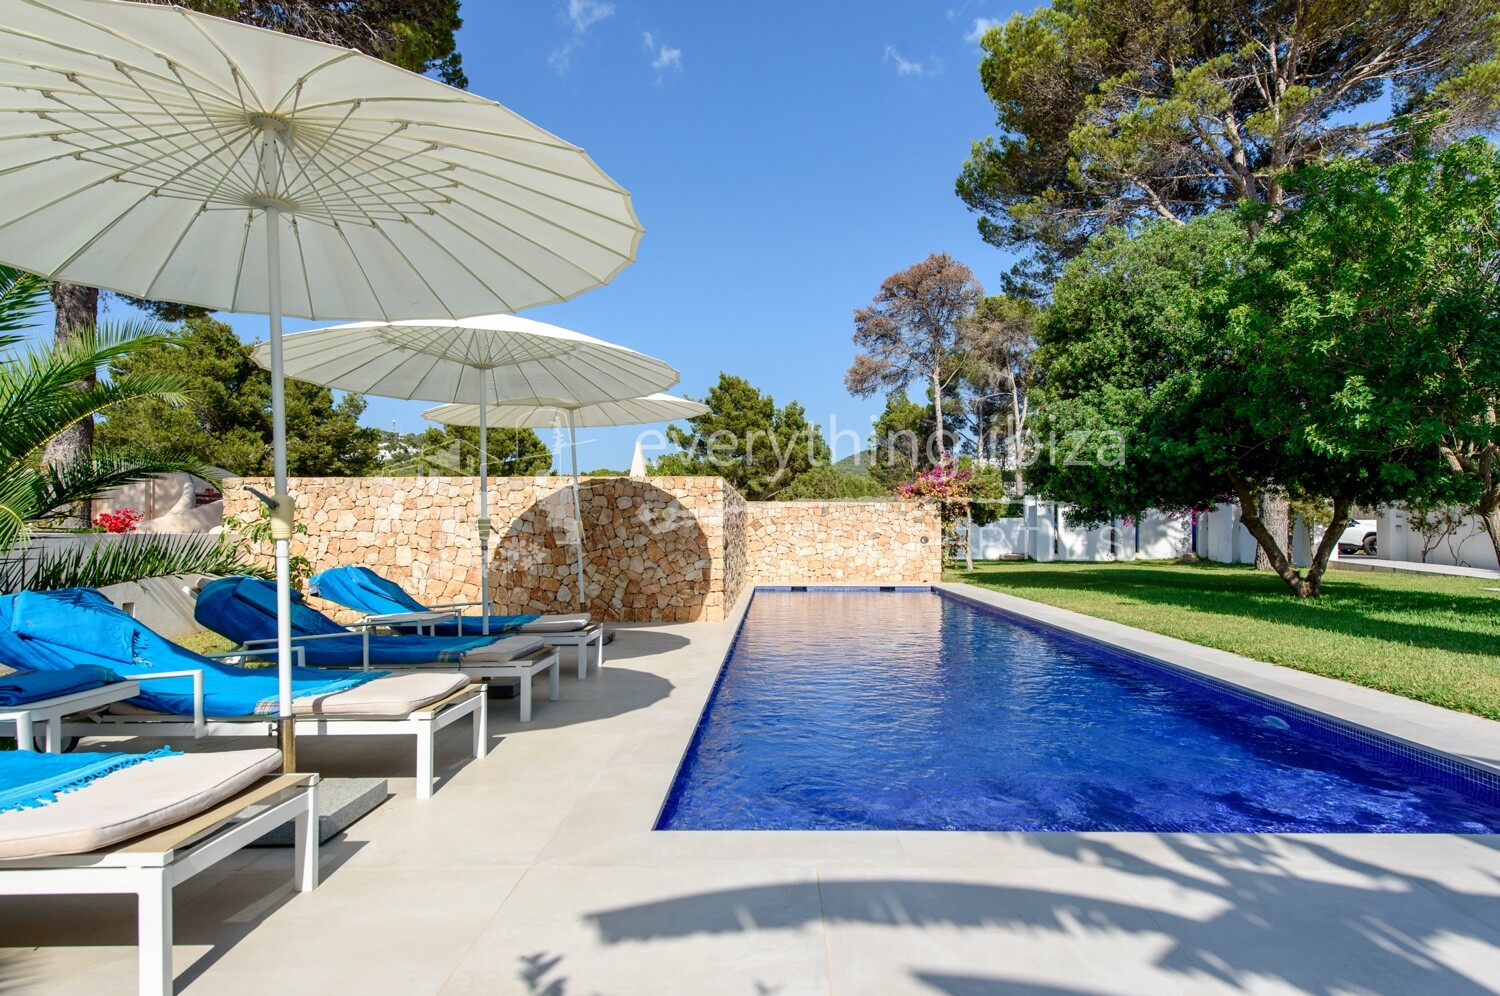 Magnificent Villa with Pool & Close to the Beach, ref. 1478, for sale in Ibiza by everything ibiza Properties